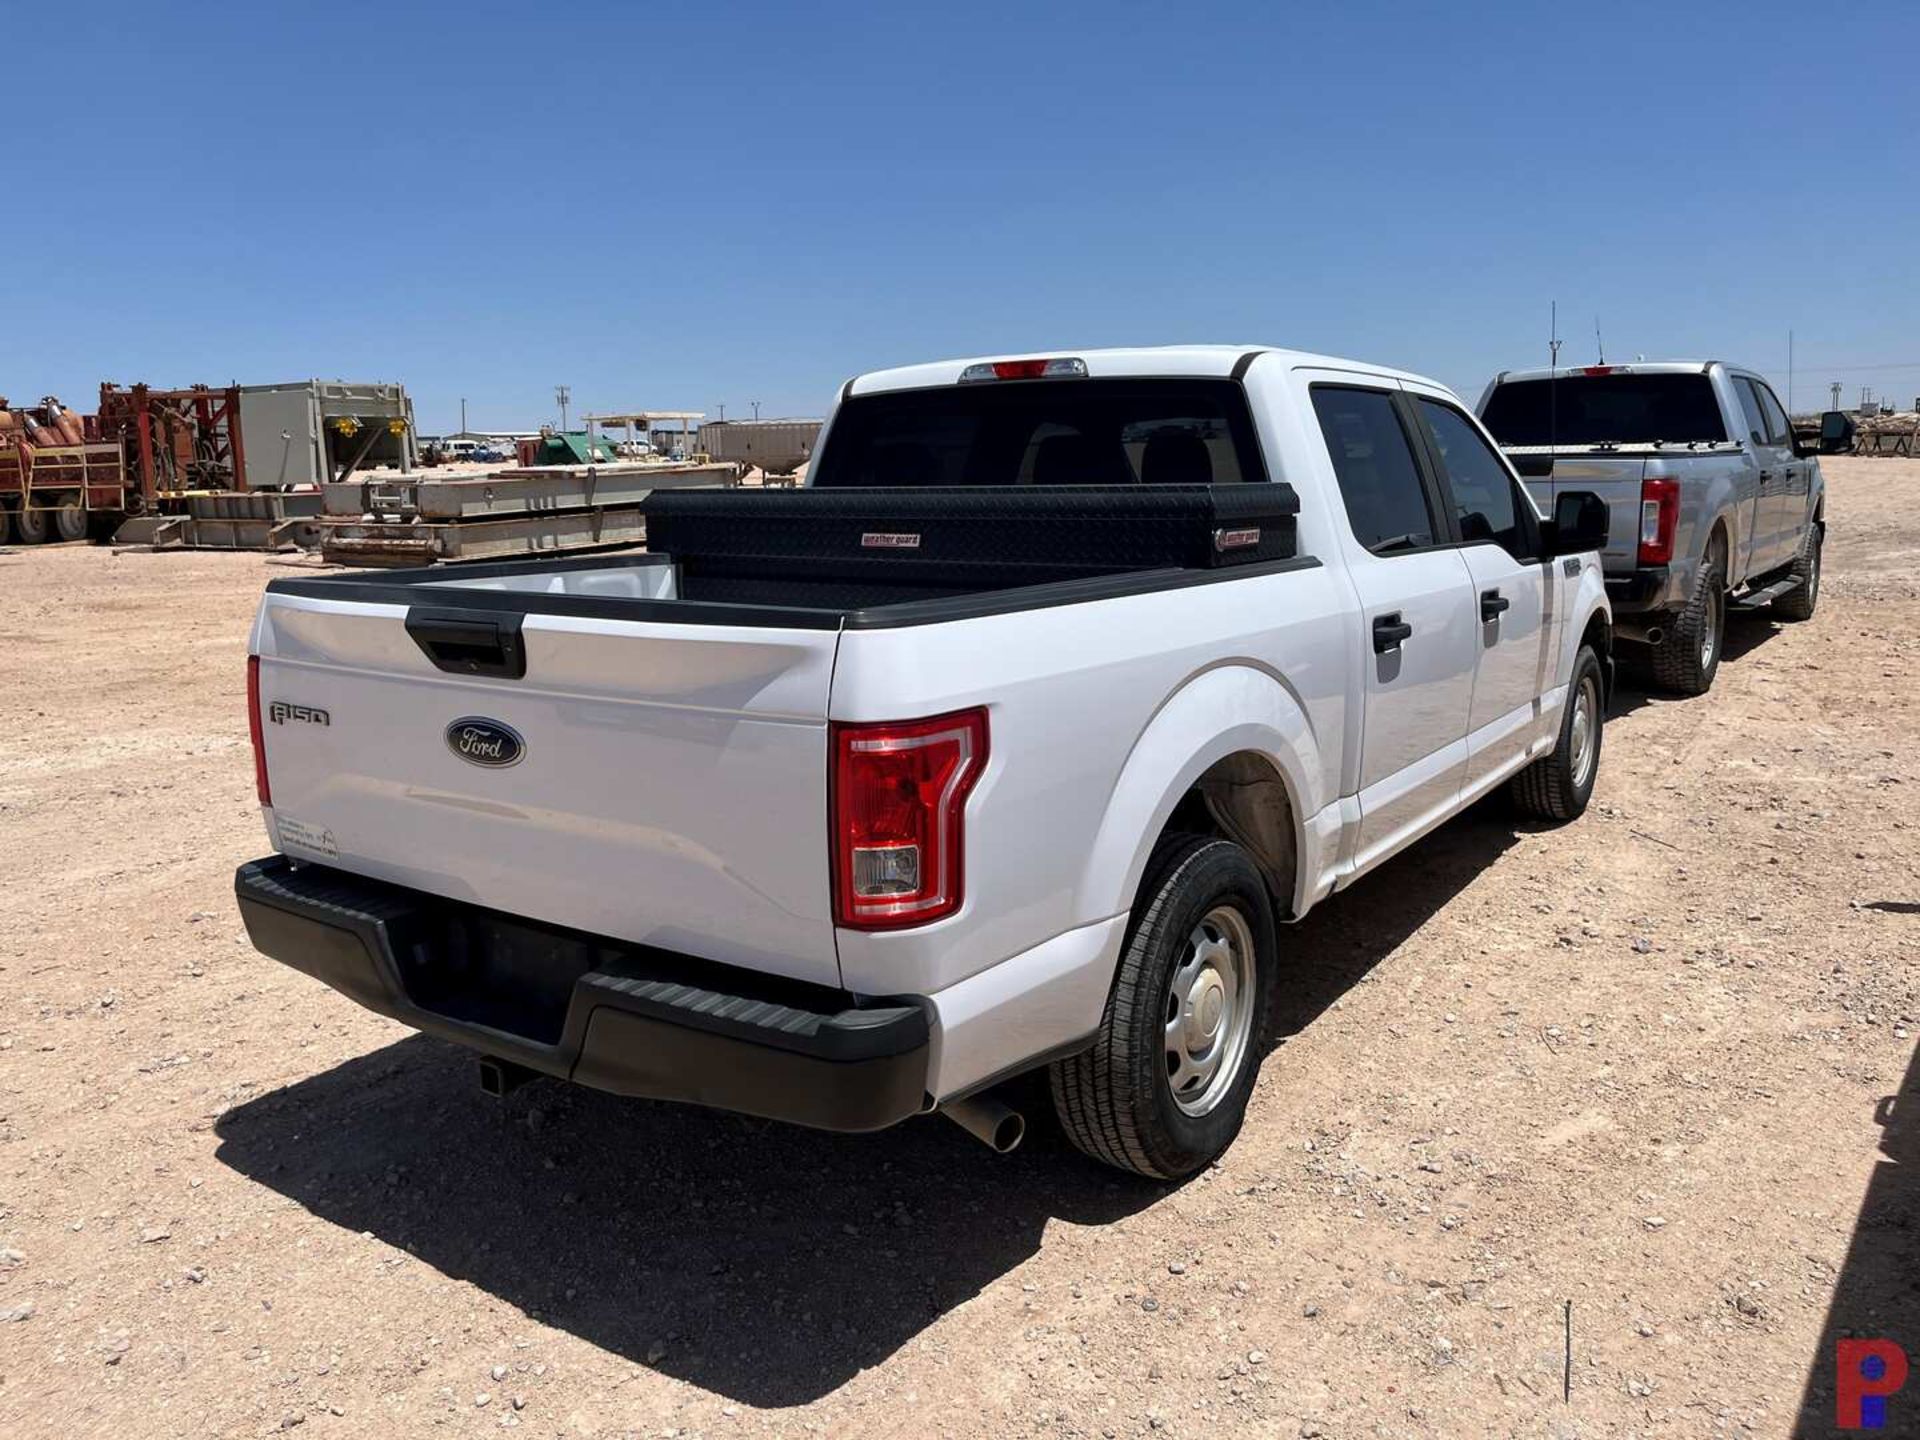 2017 FORD F-150 CREW CAB PICKUP TRUCK - Image 3 of 7